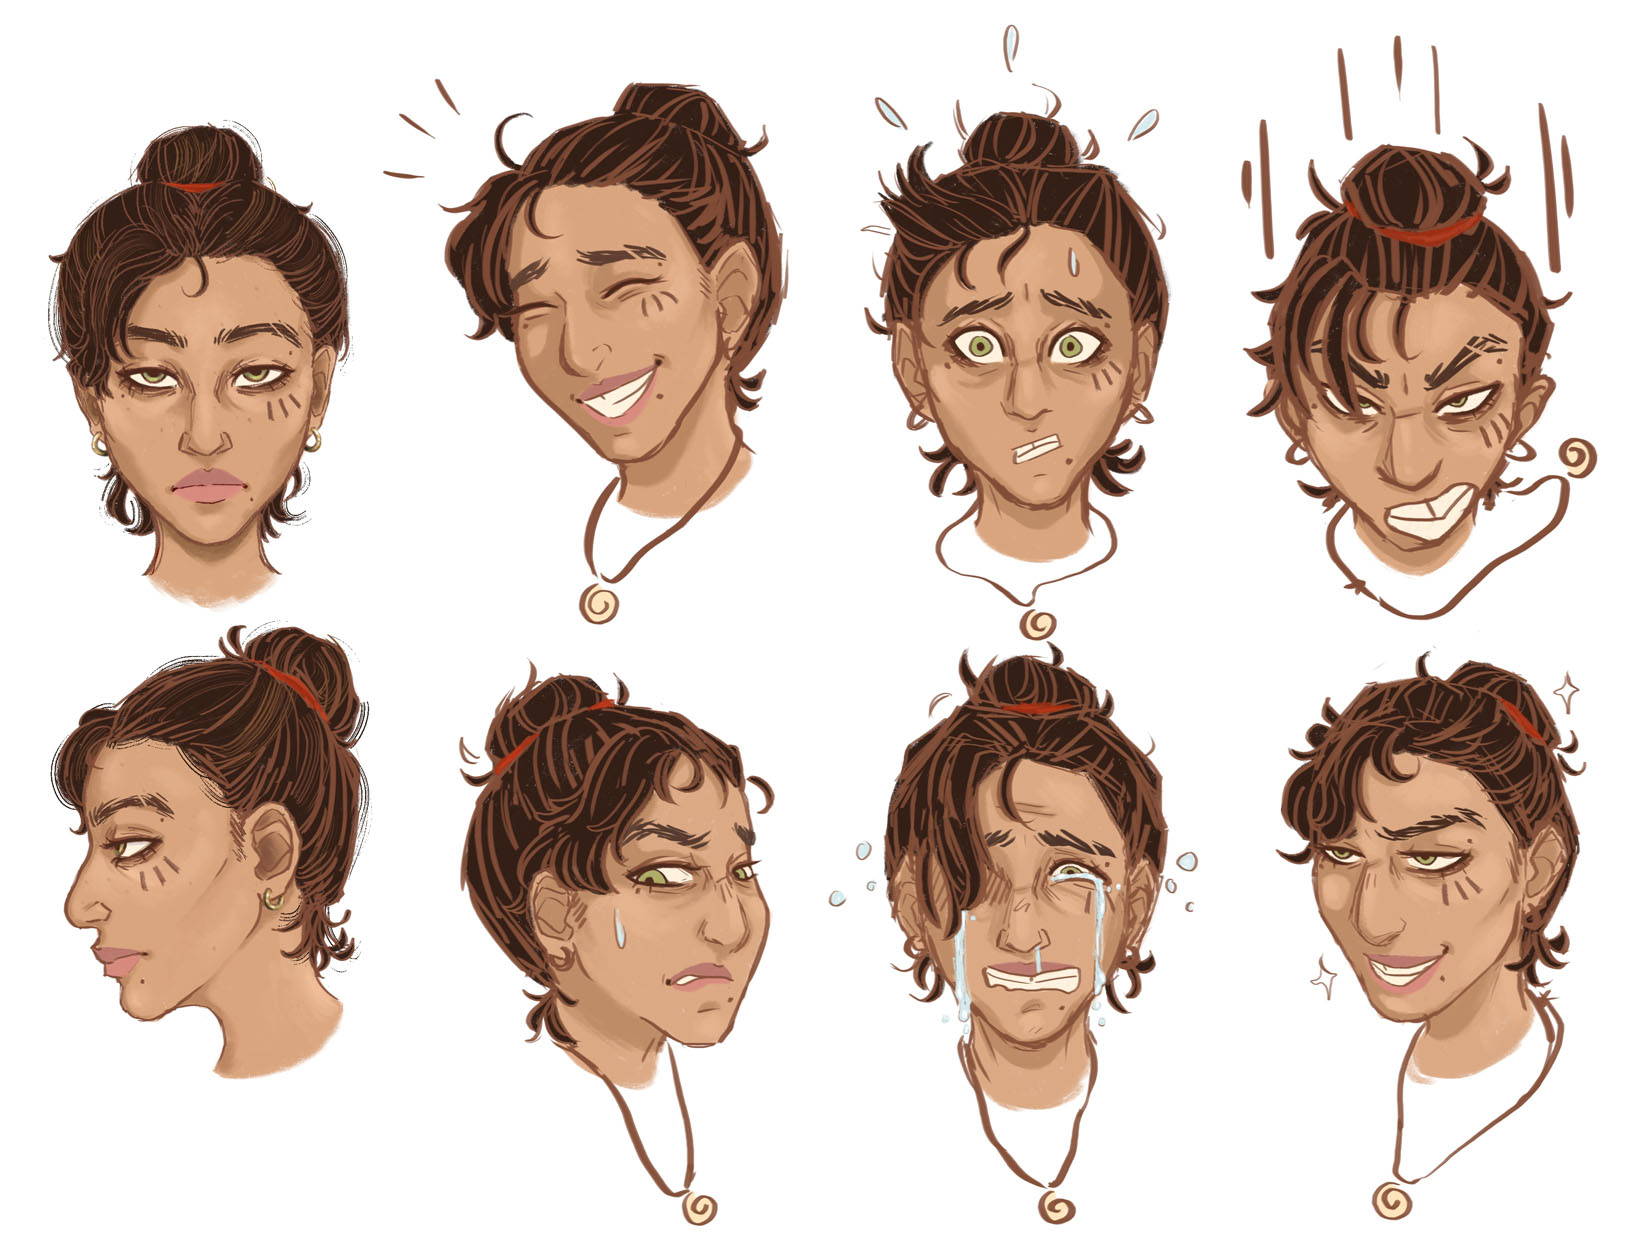 An illustration by Indi B of 8 portraits with varying expressions, showing the protagonist character Sol from different angles.